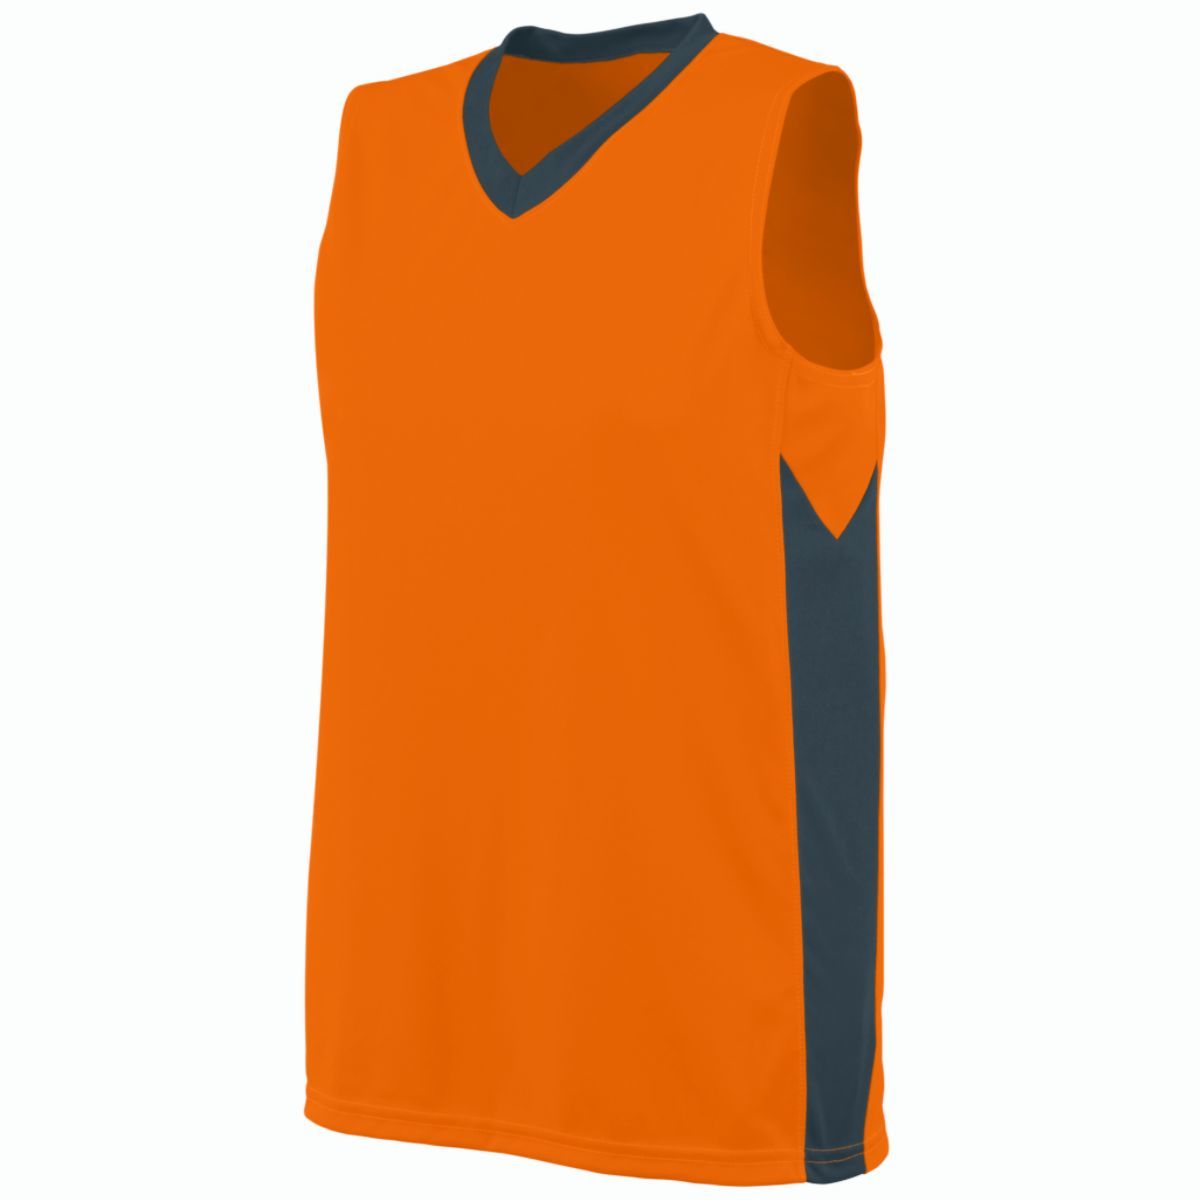 Augusta Sportswear Ladies Block Out Jersey in Power Orange/Slate  -Part of the Ladies, Ladies-Jersey, Augusta-Products, Basketball, Shirts, All-Sports, All-Sports-1 product lines at KanaleyCreations.com